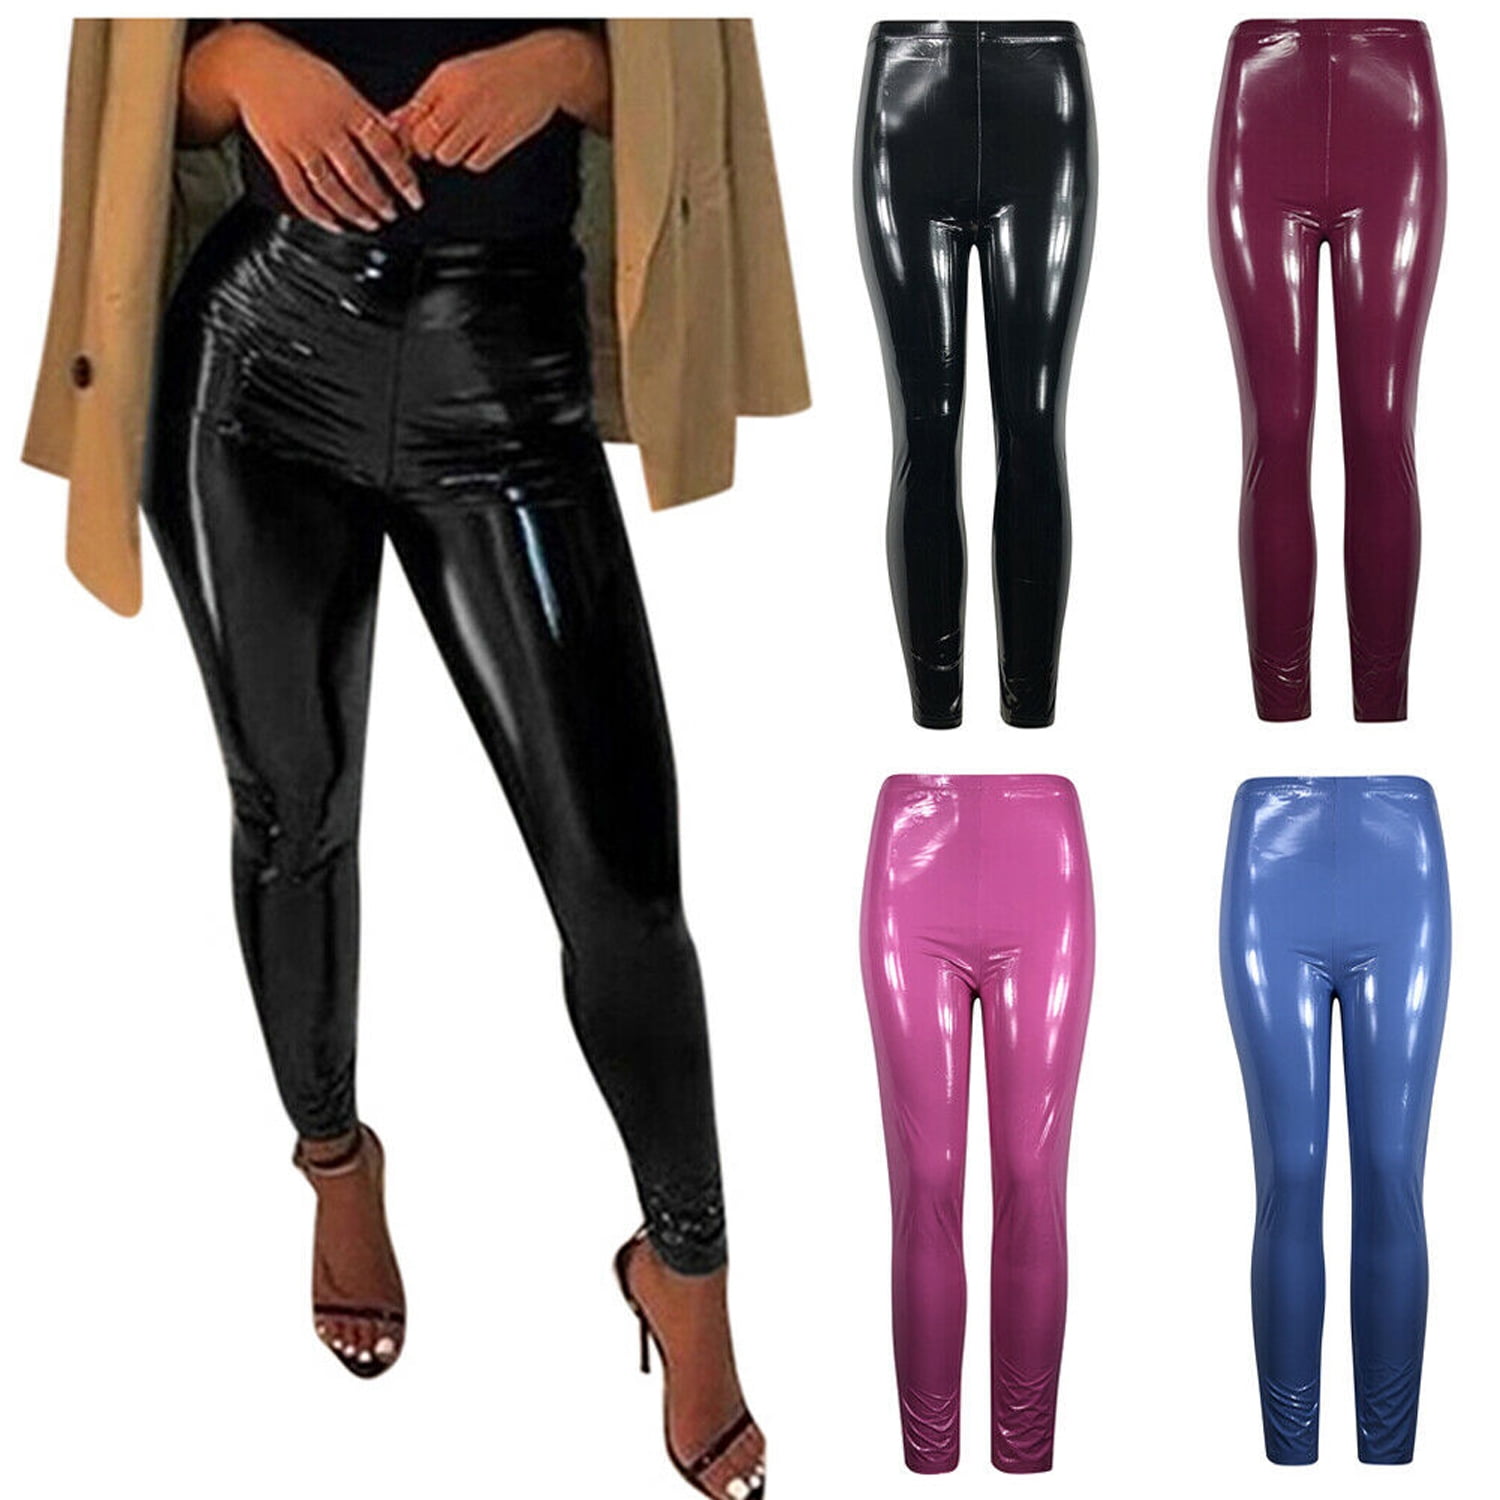 Ladies High Waist Faux Leather Leggings Wet Look Shiny Slim Stretchy Tight Pants